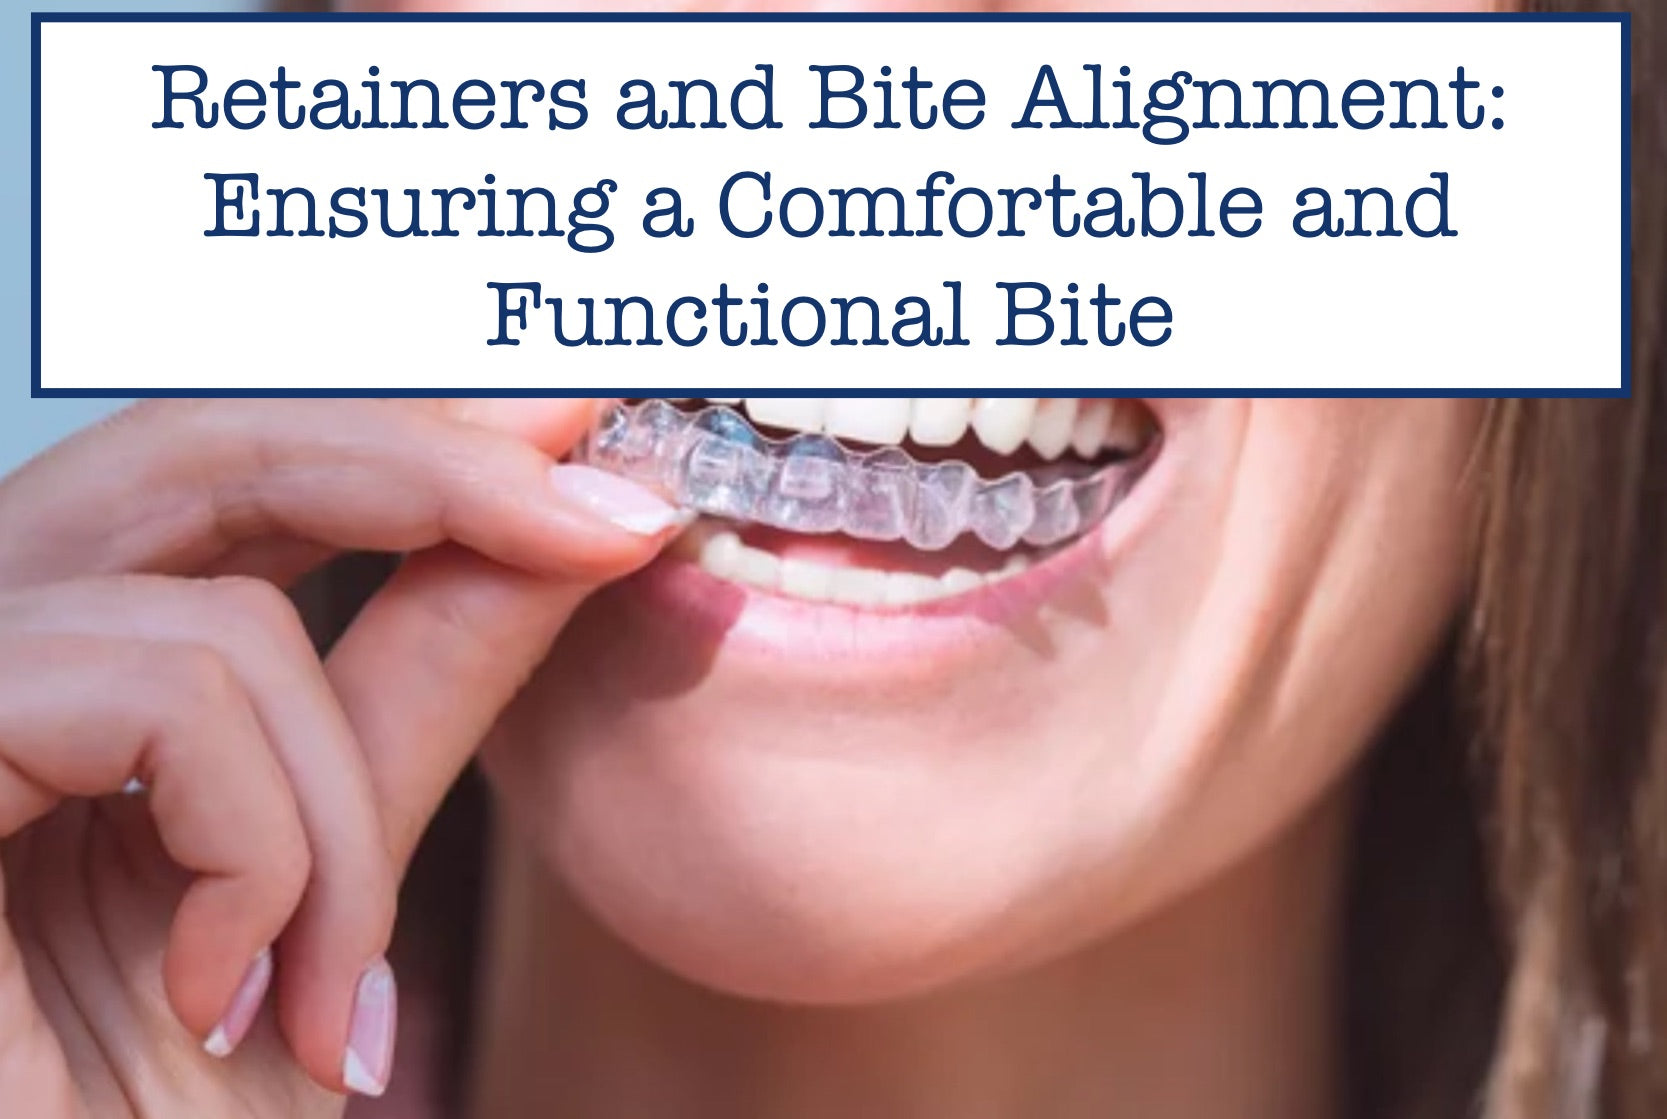 Retainers and Bite Alignment: Ensuring a Comfortable and Functional Bite